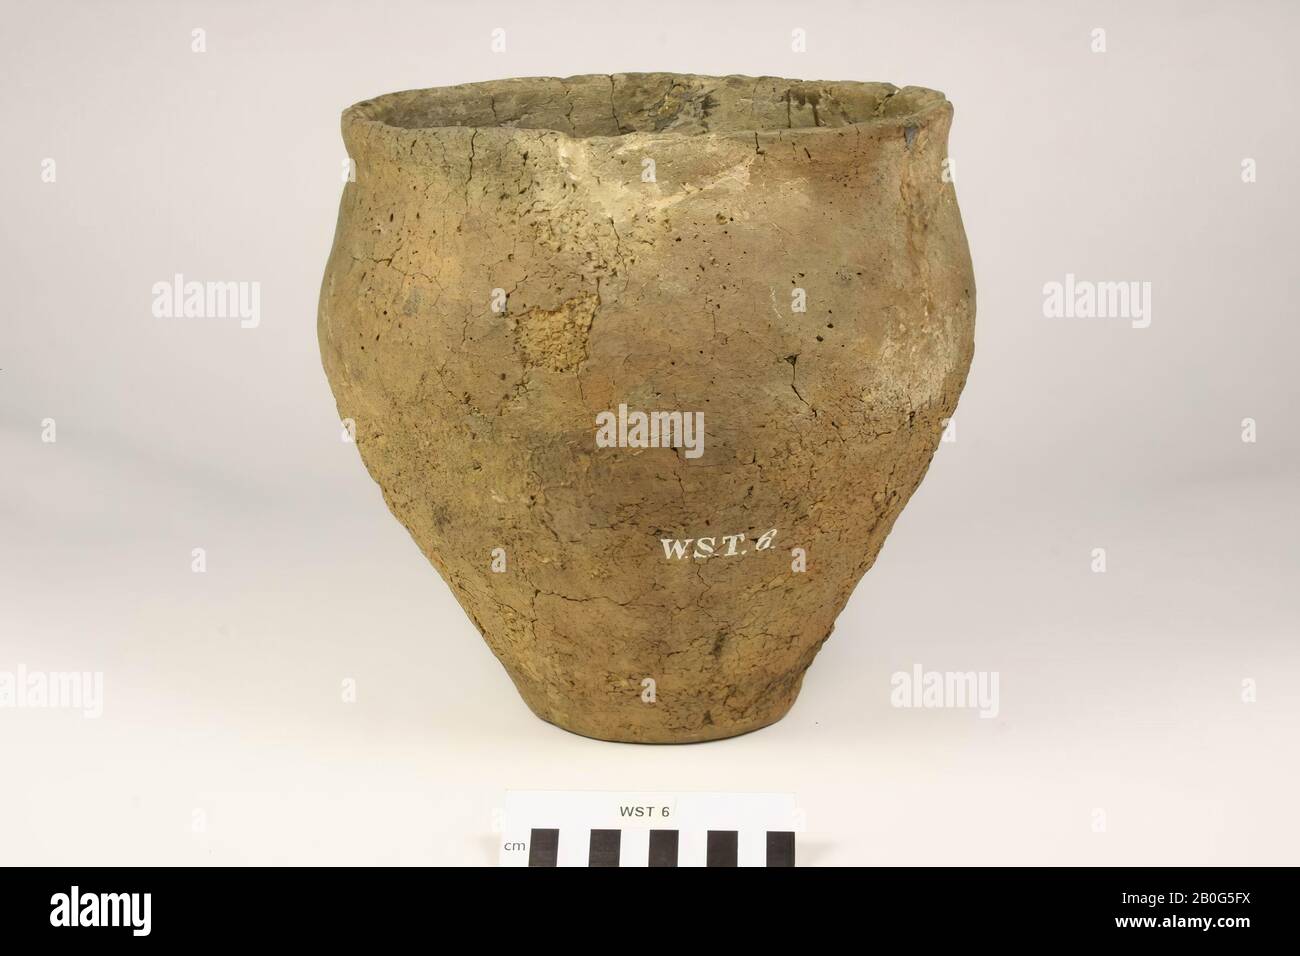 Germanic cartel rimurn of pottery. Old bonding, cracks, surface cracks, surface damage. Contains cremated residues, urn, earthenware, h: 24.4 cm, diam: 25 cm, prehistory -800 Stock Photo